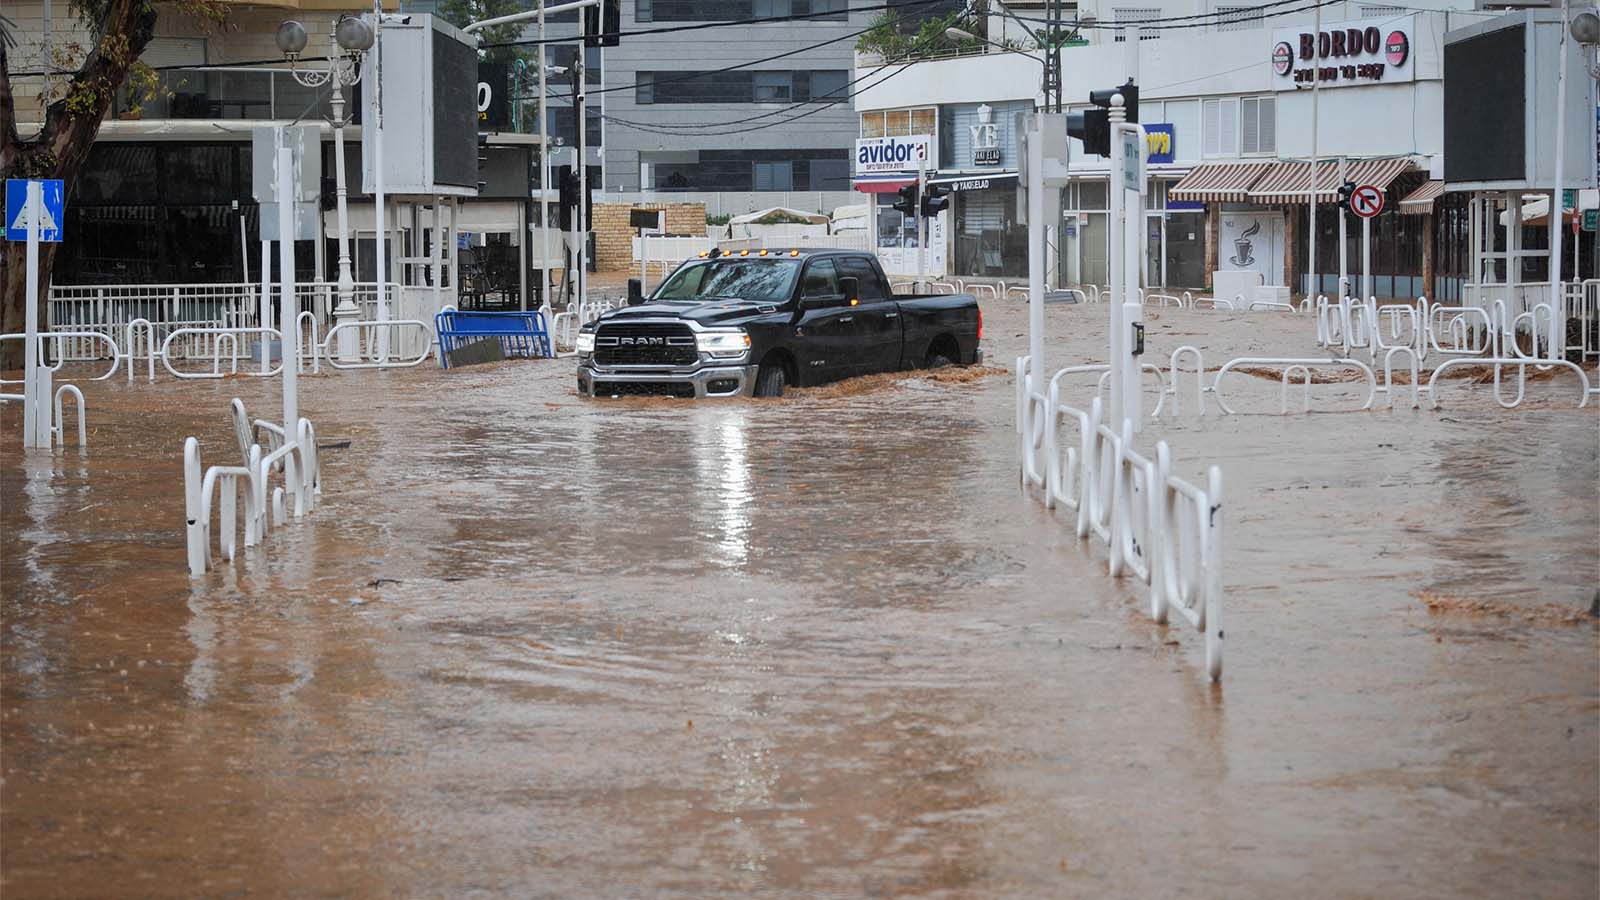 A car drives on a flooded road in the northern Israeli city of Nahariyya, on a stormy winter day, on January 8, 2020. Photograph: Meir Vaknin/Flash90